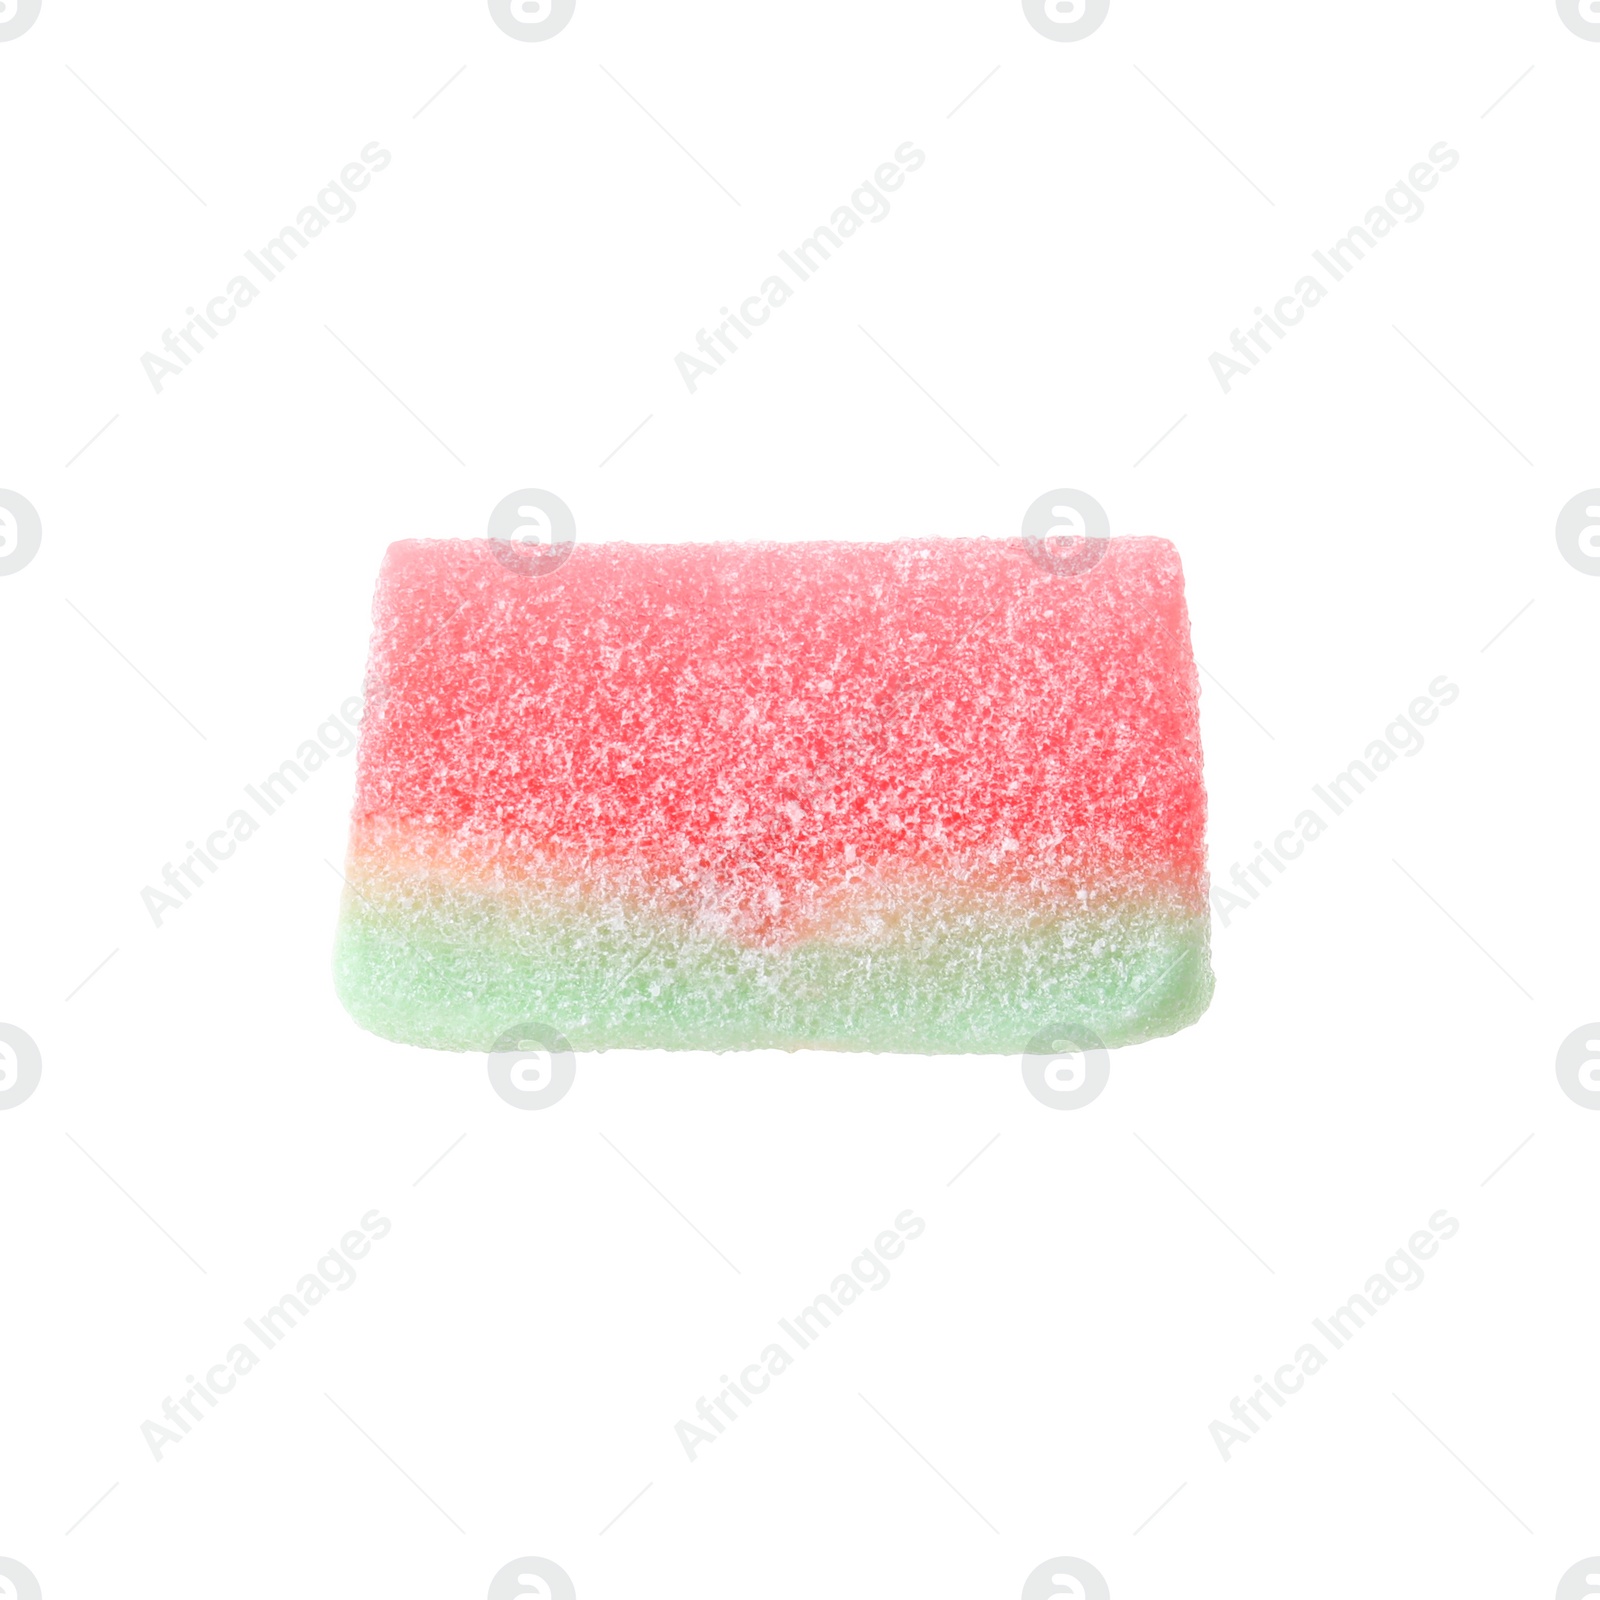 Photo of Sweet jelly watermelon candy on white background